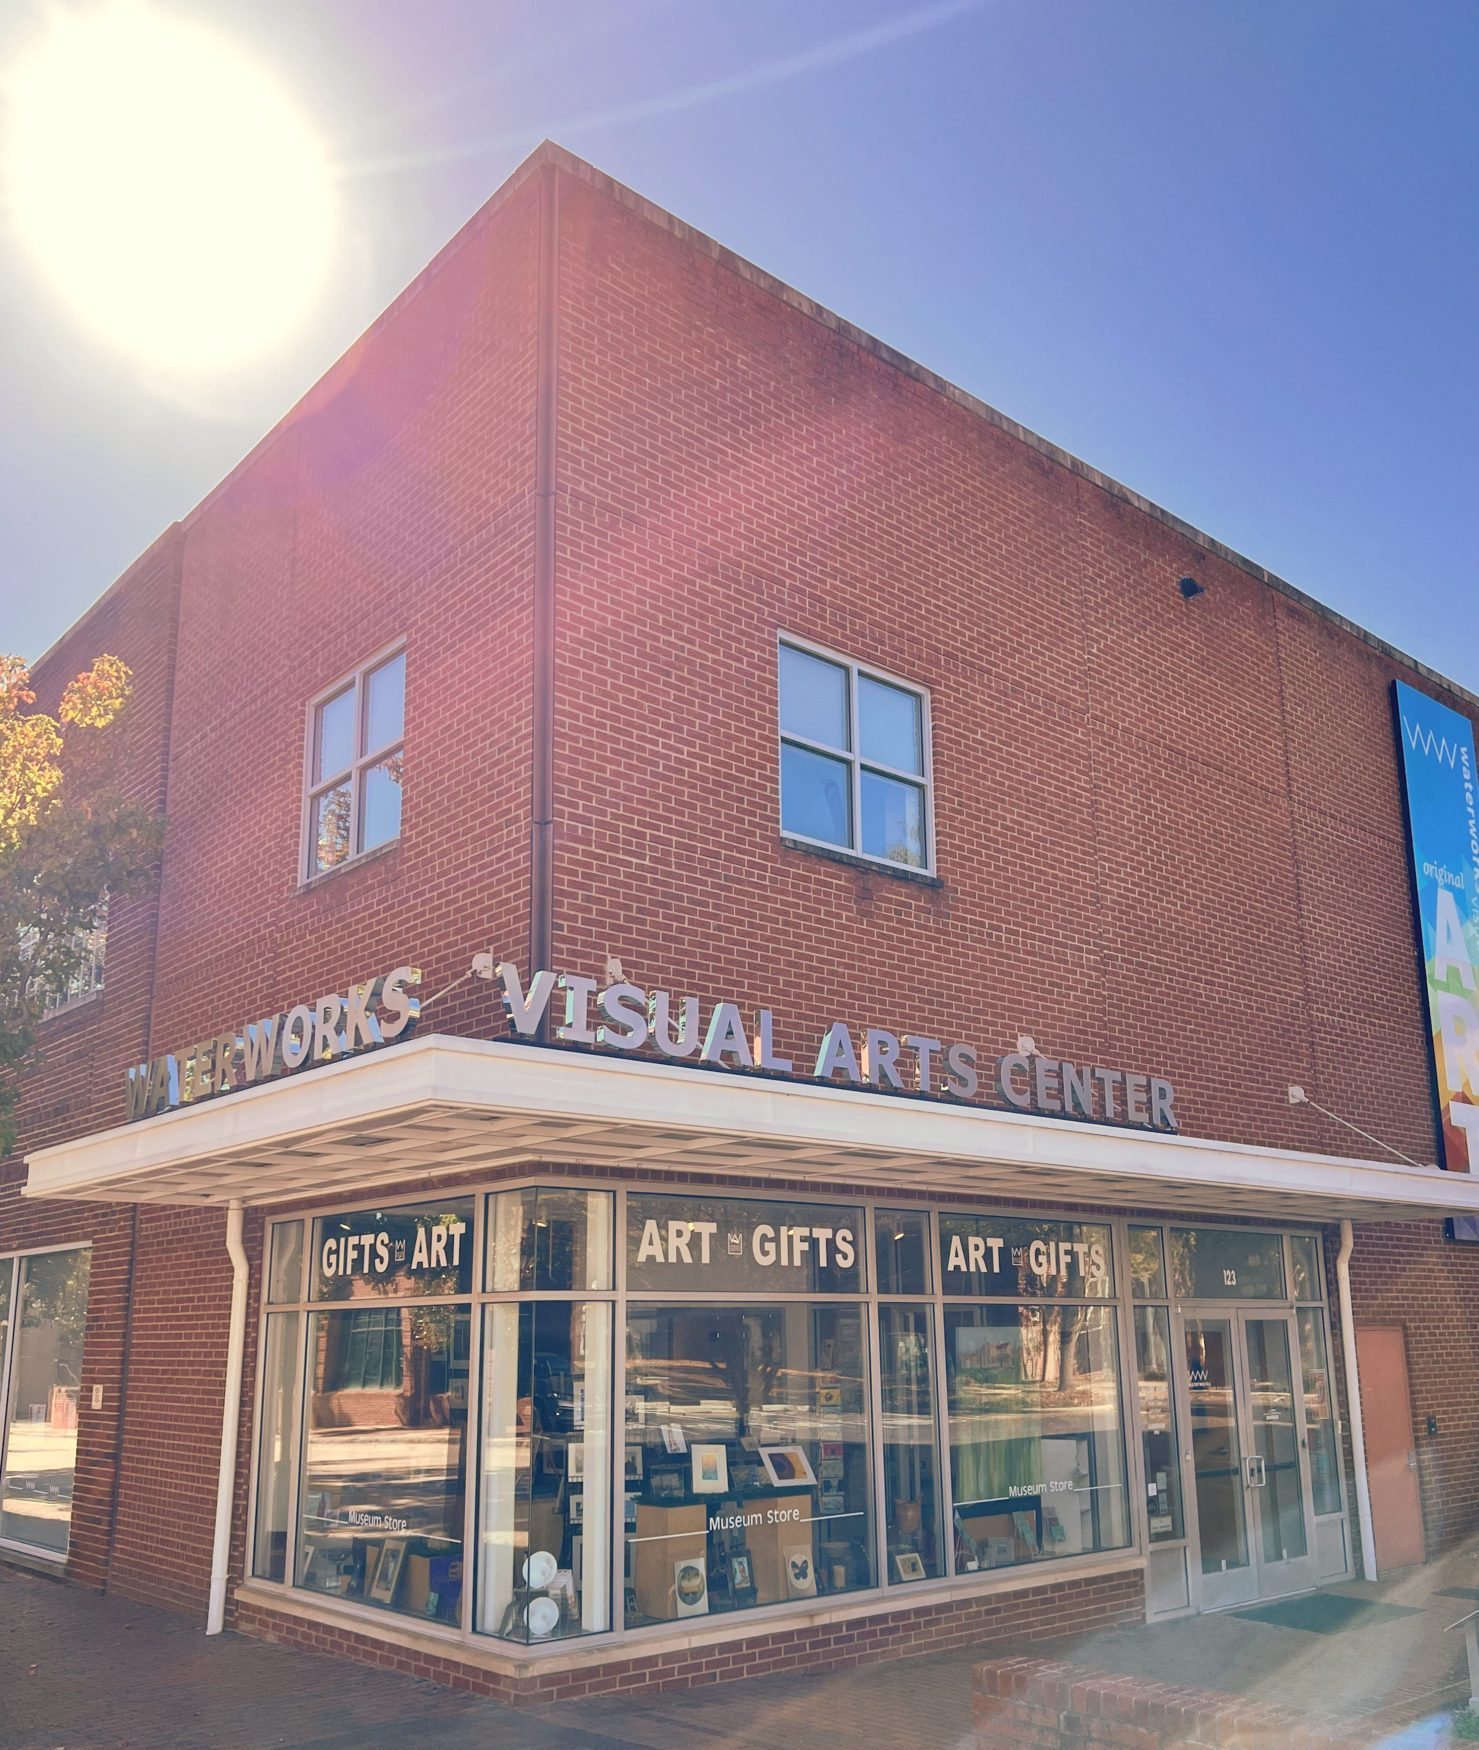 Exterior of a building with a sign that reads Waterworks Visual Arts Center